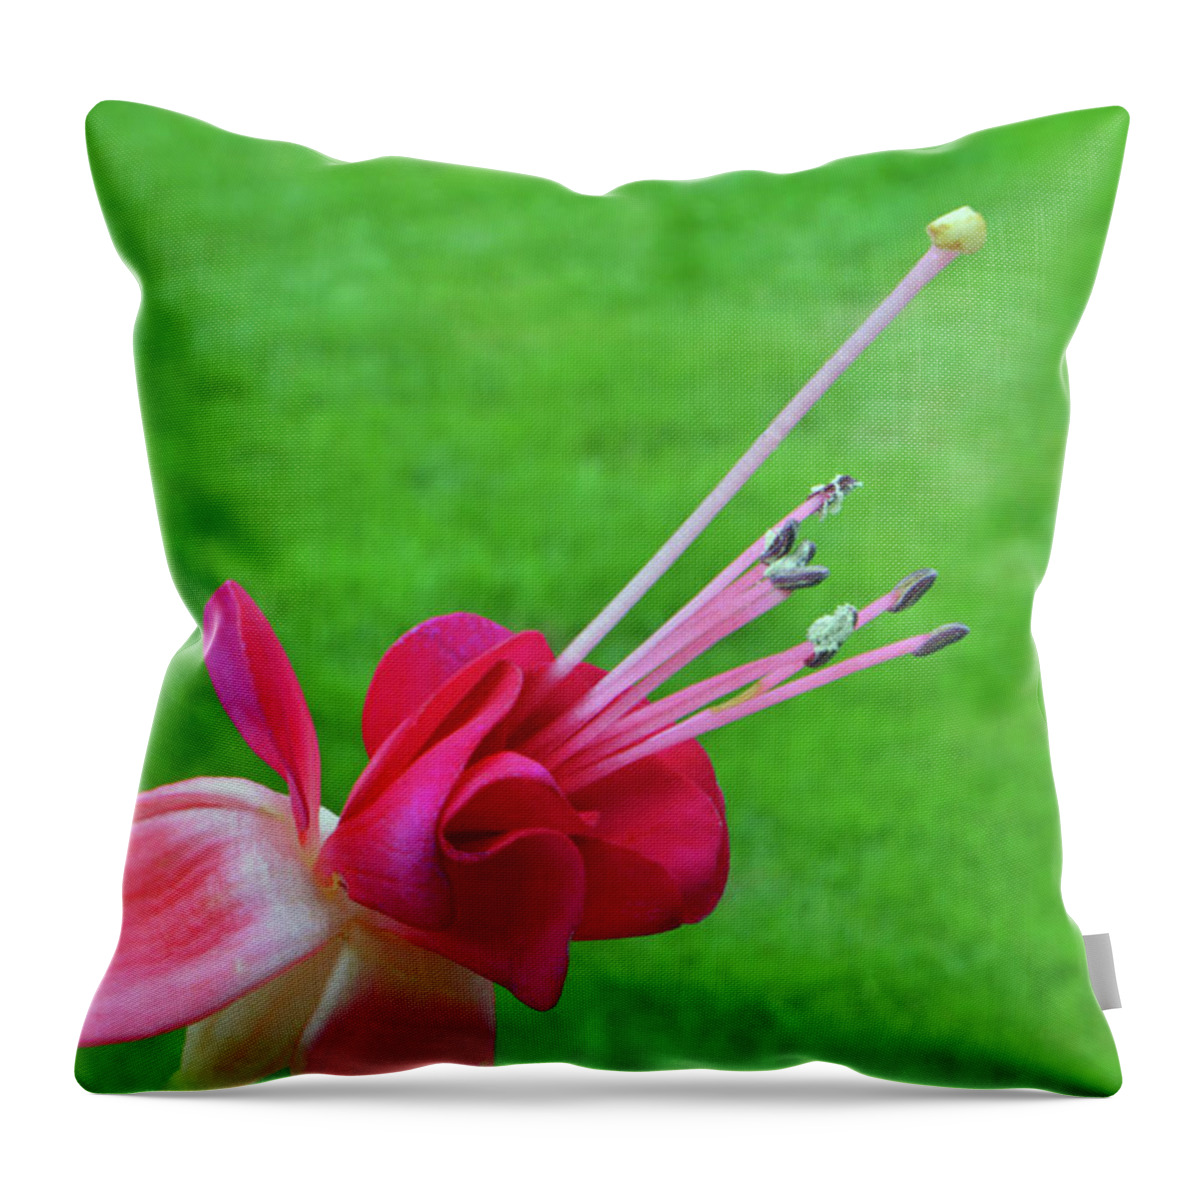 Fuchsia Throw Pillow featuring the photograph Stamen of Fuchsia by Terence Davis